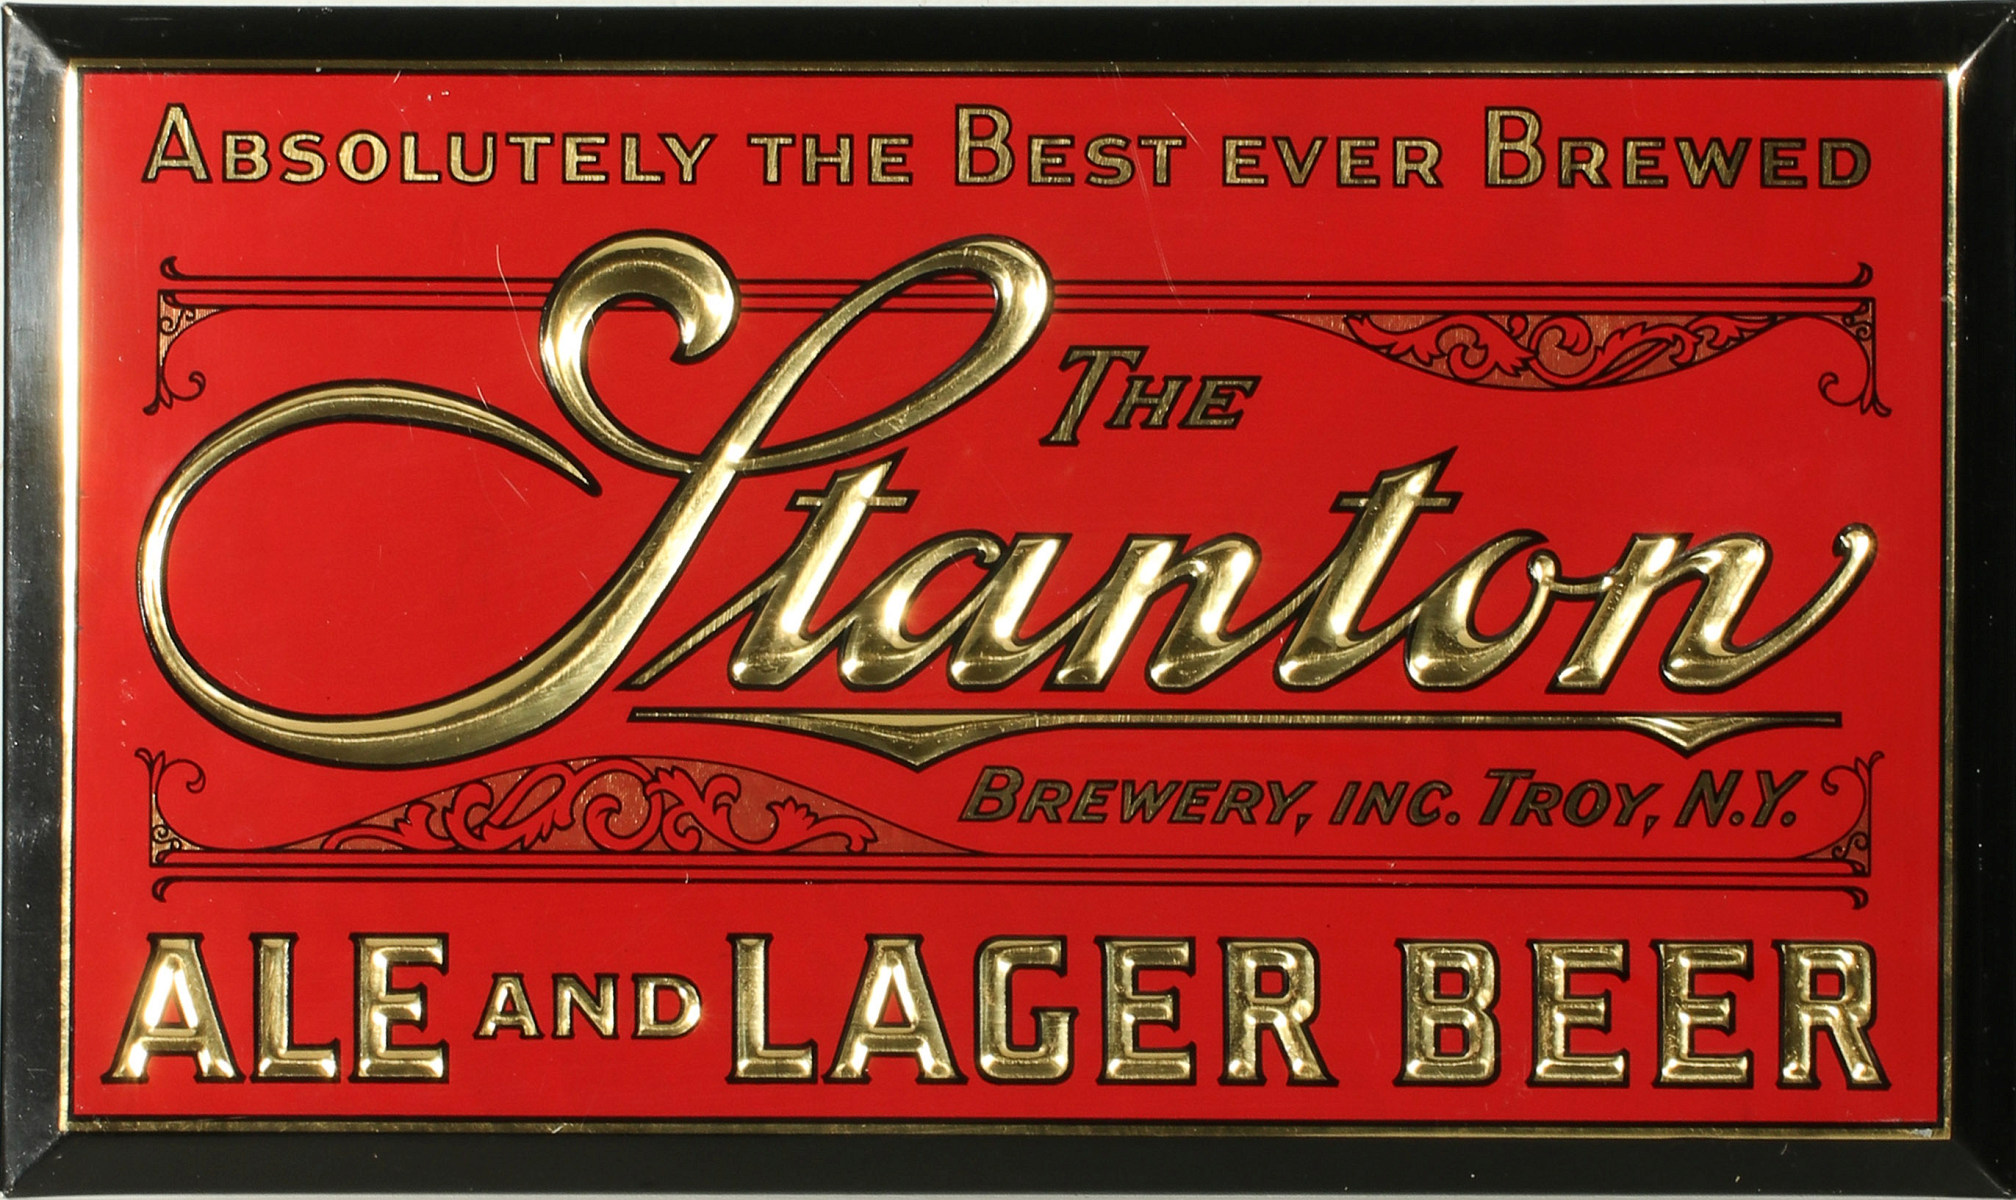 THE STANTON BREWERY ALE AND LAGER BEER ADVERTISING SIGN